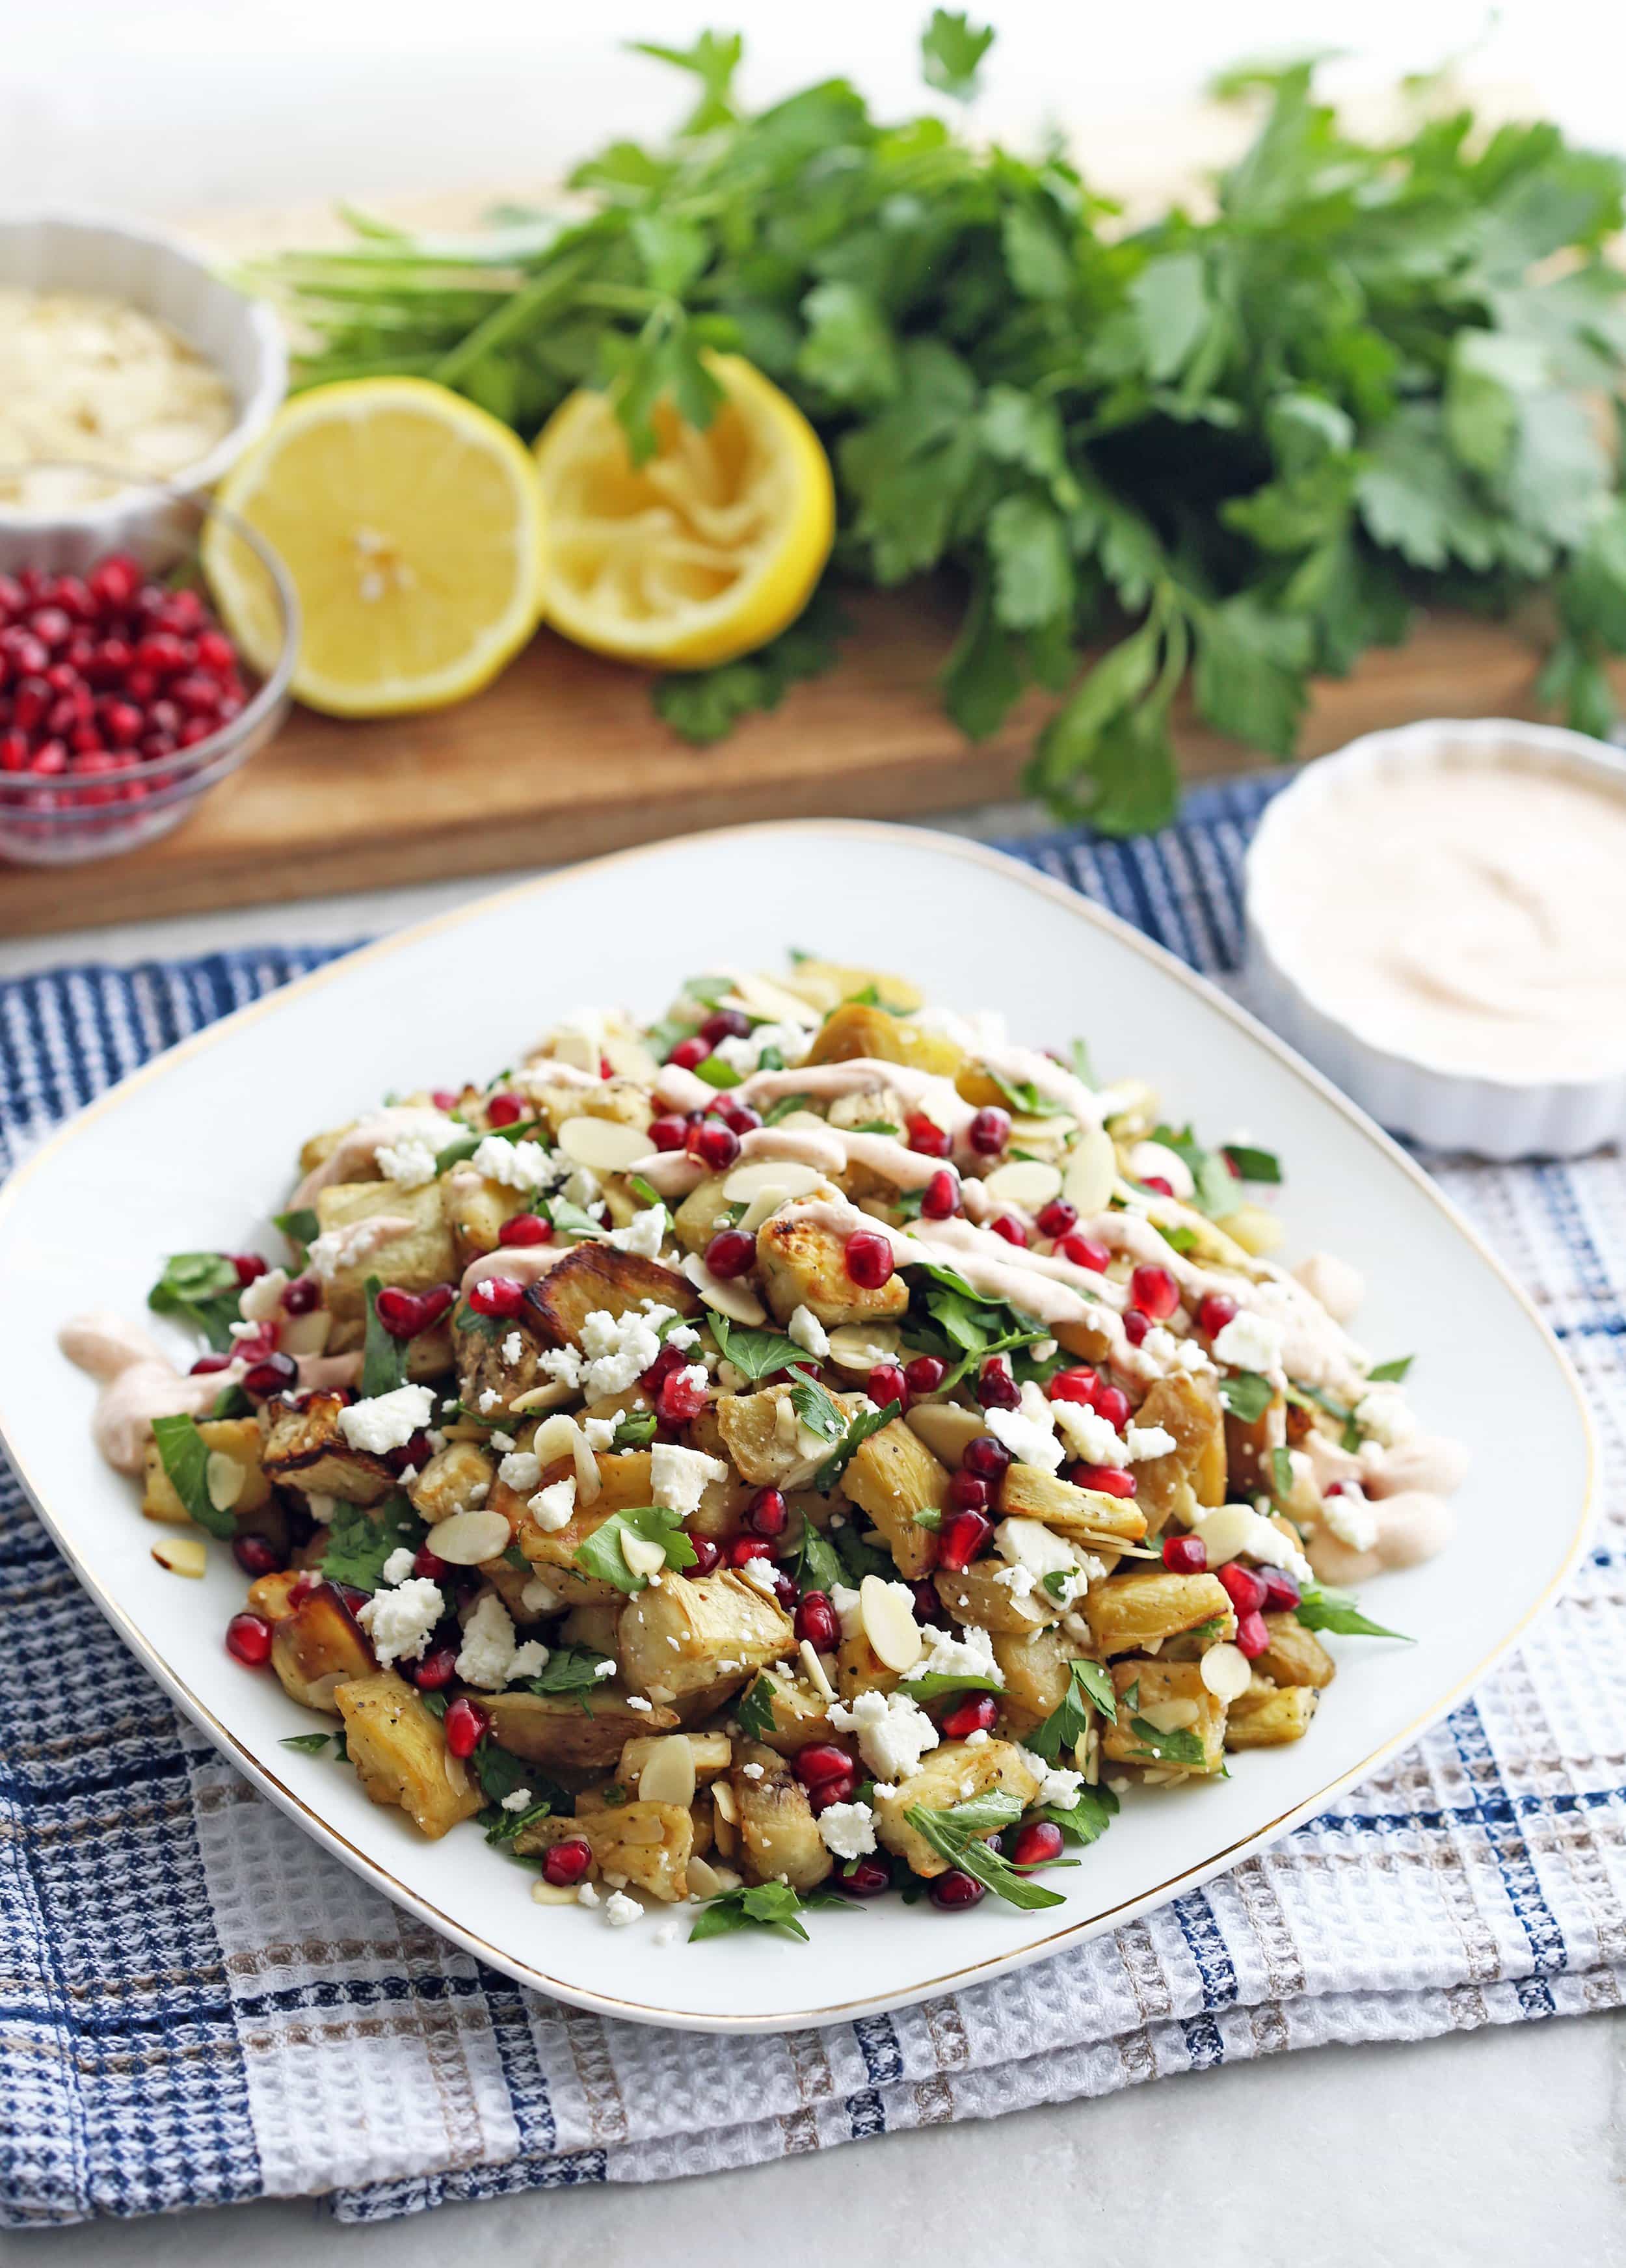 A white plate full of roasted eggplant pomegranate feta salad with smoked paprika yogurt dressing drizzled on top.